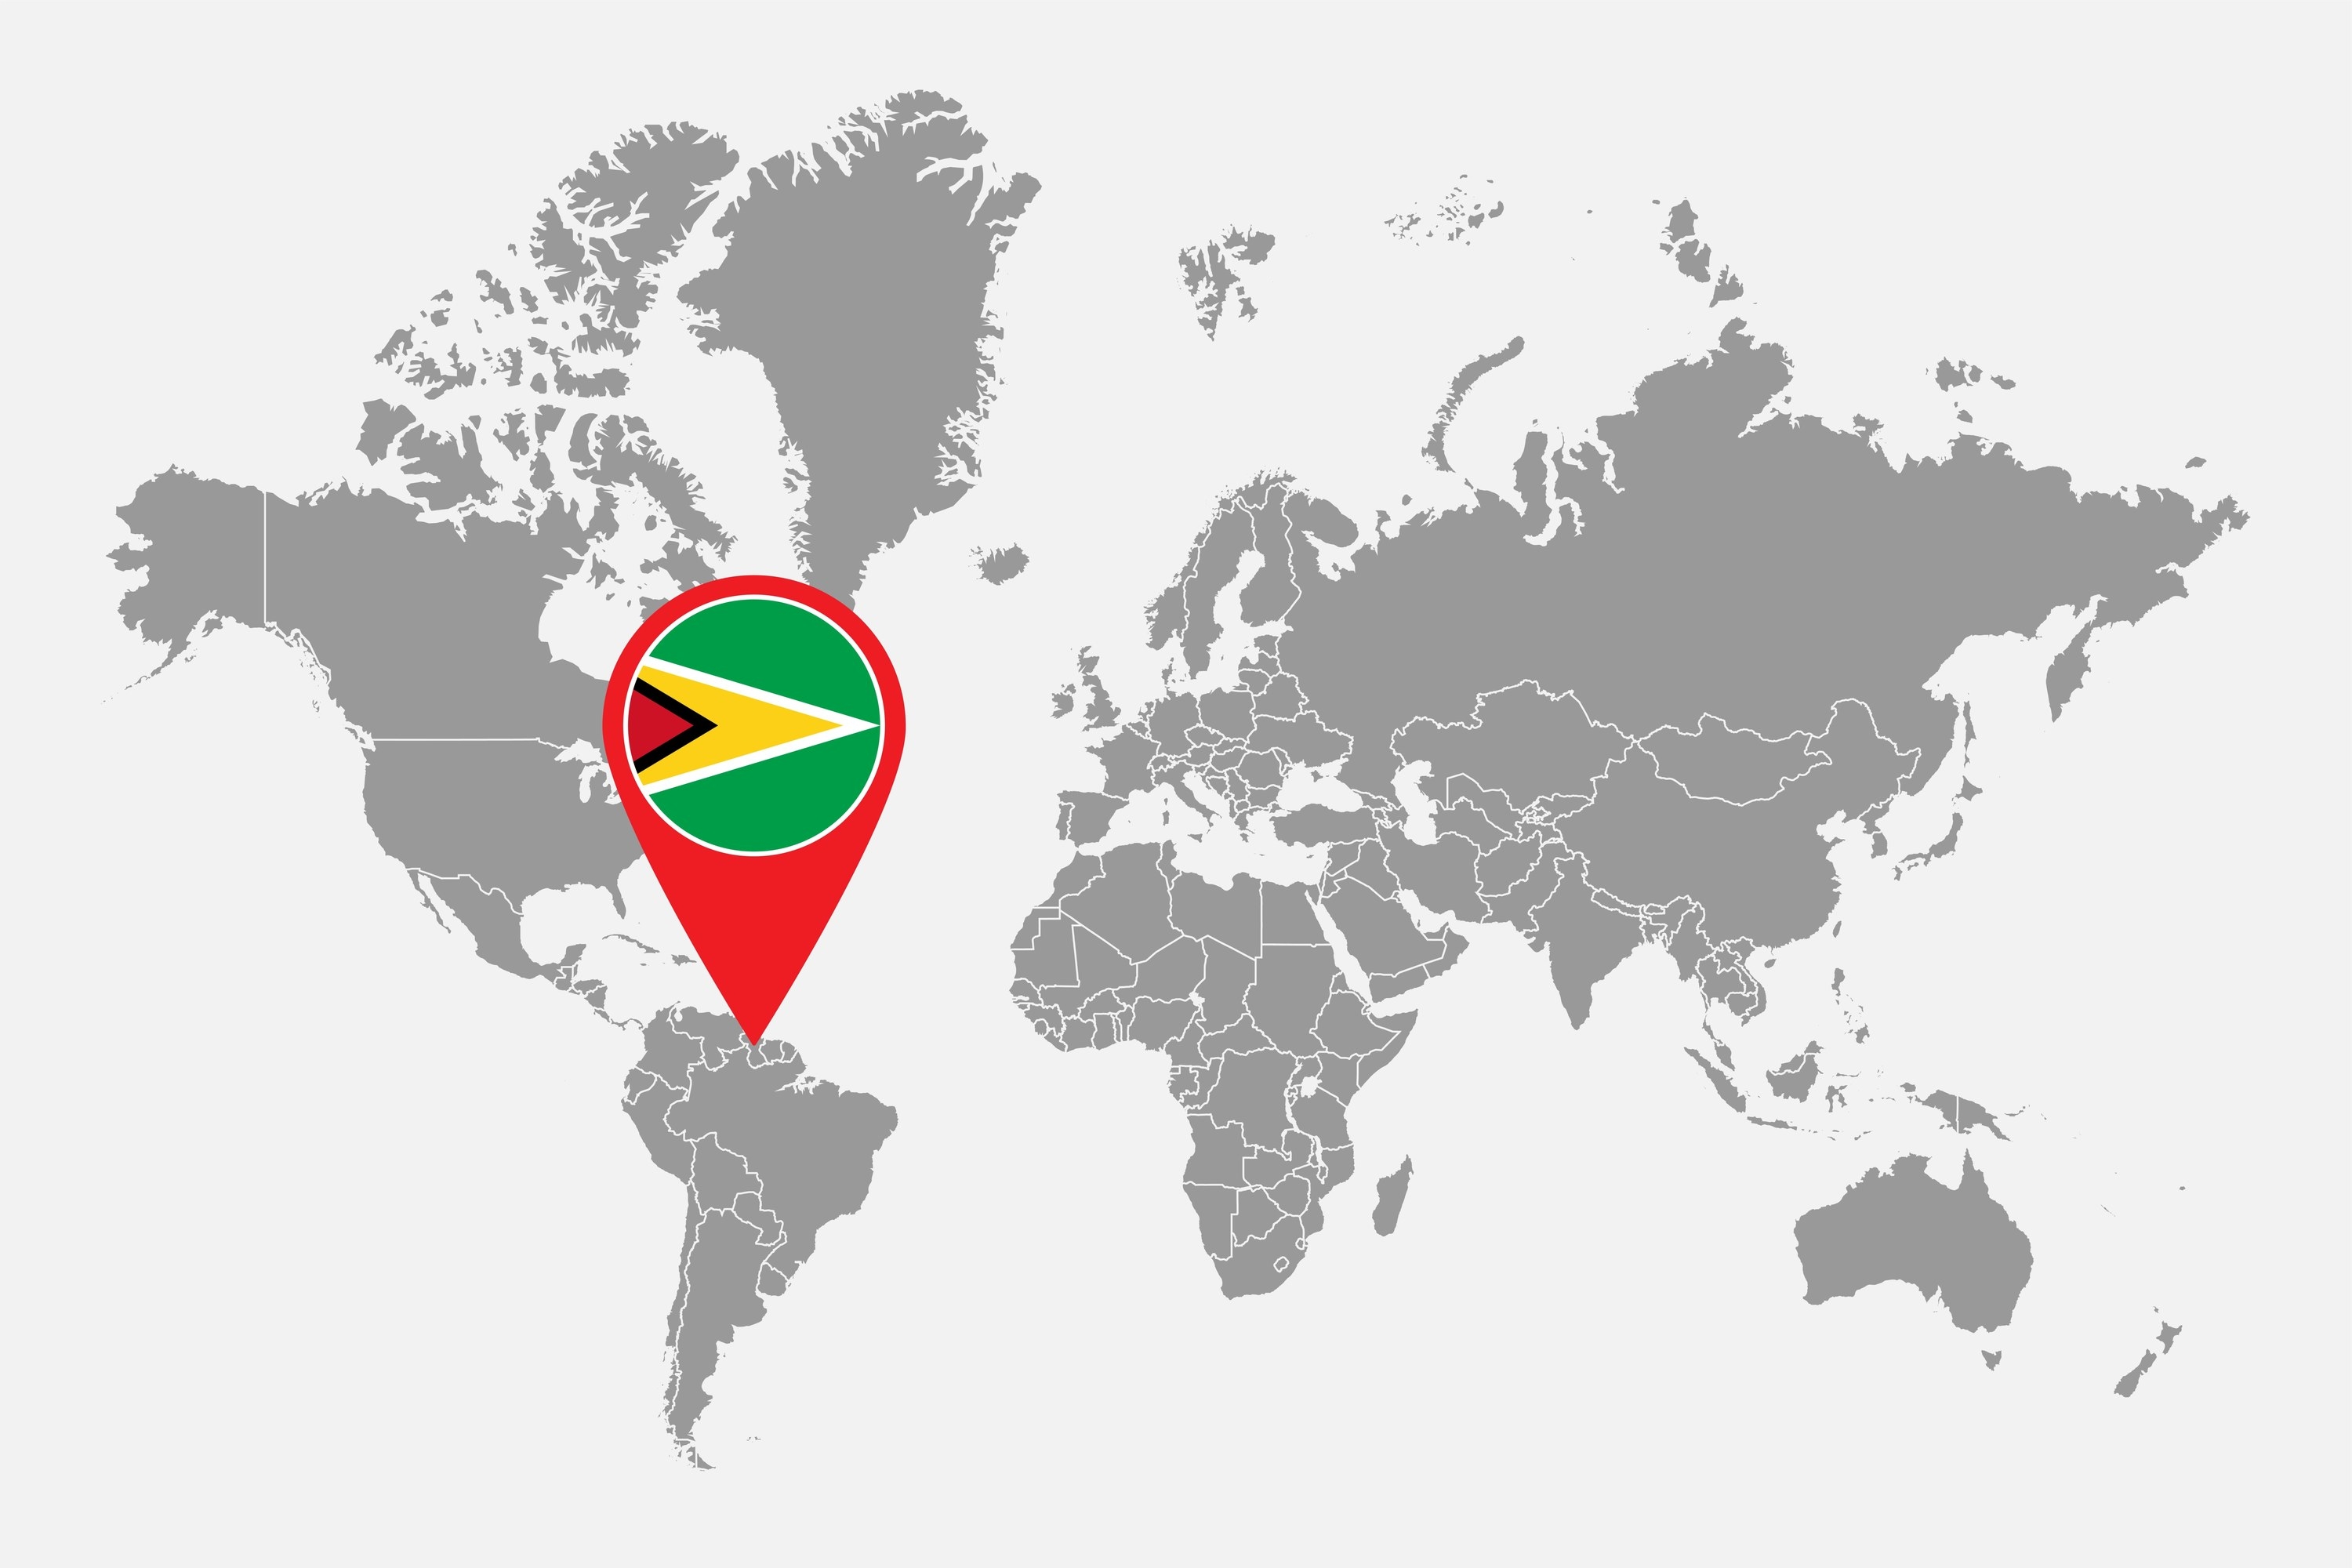 A world map with Guyana indicated